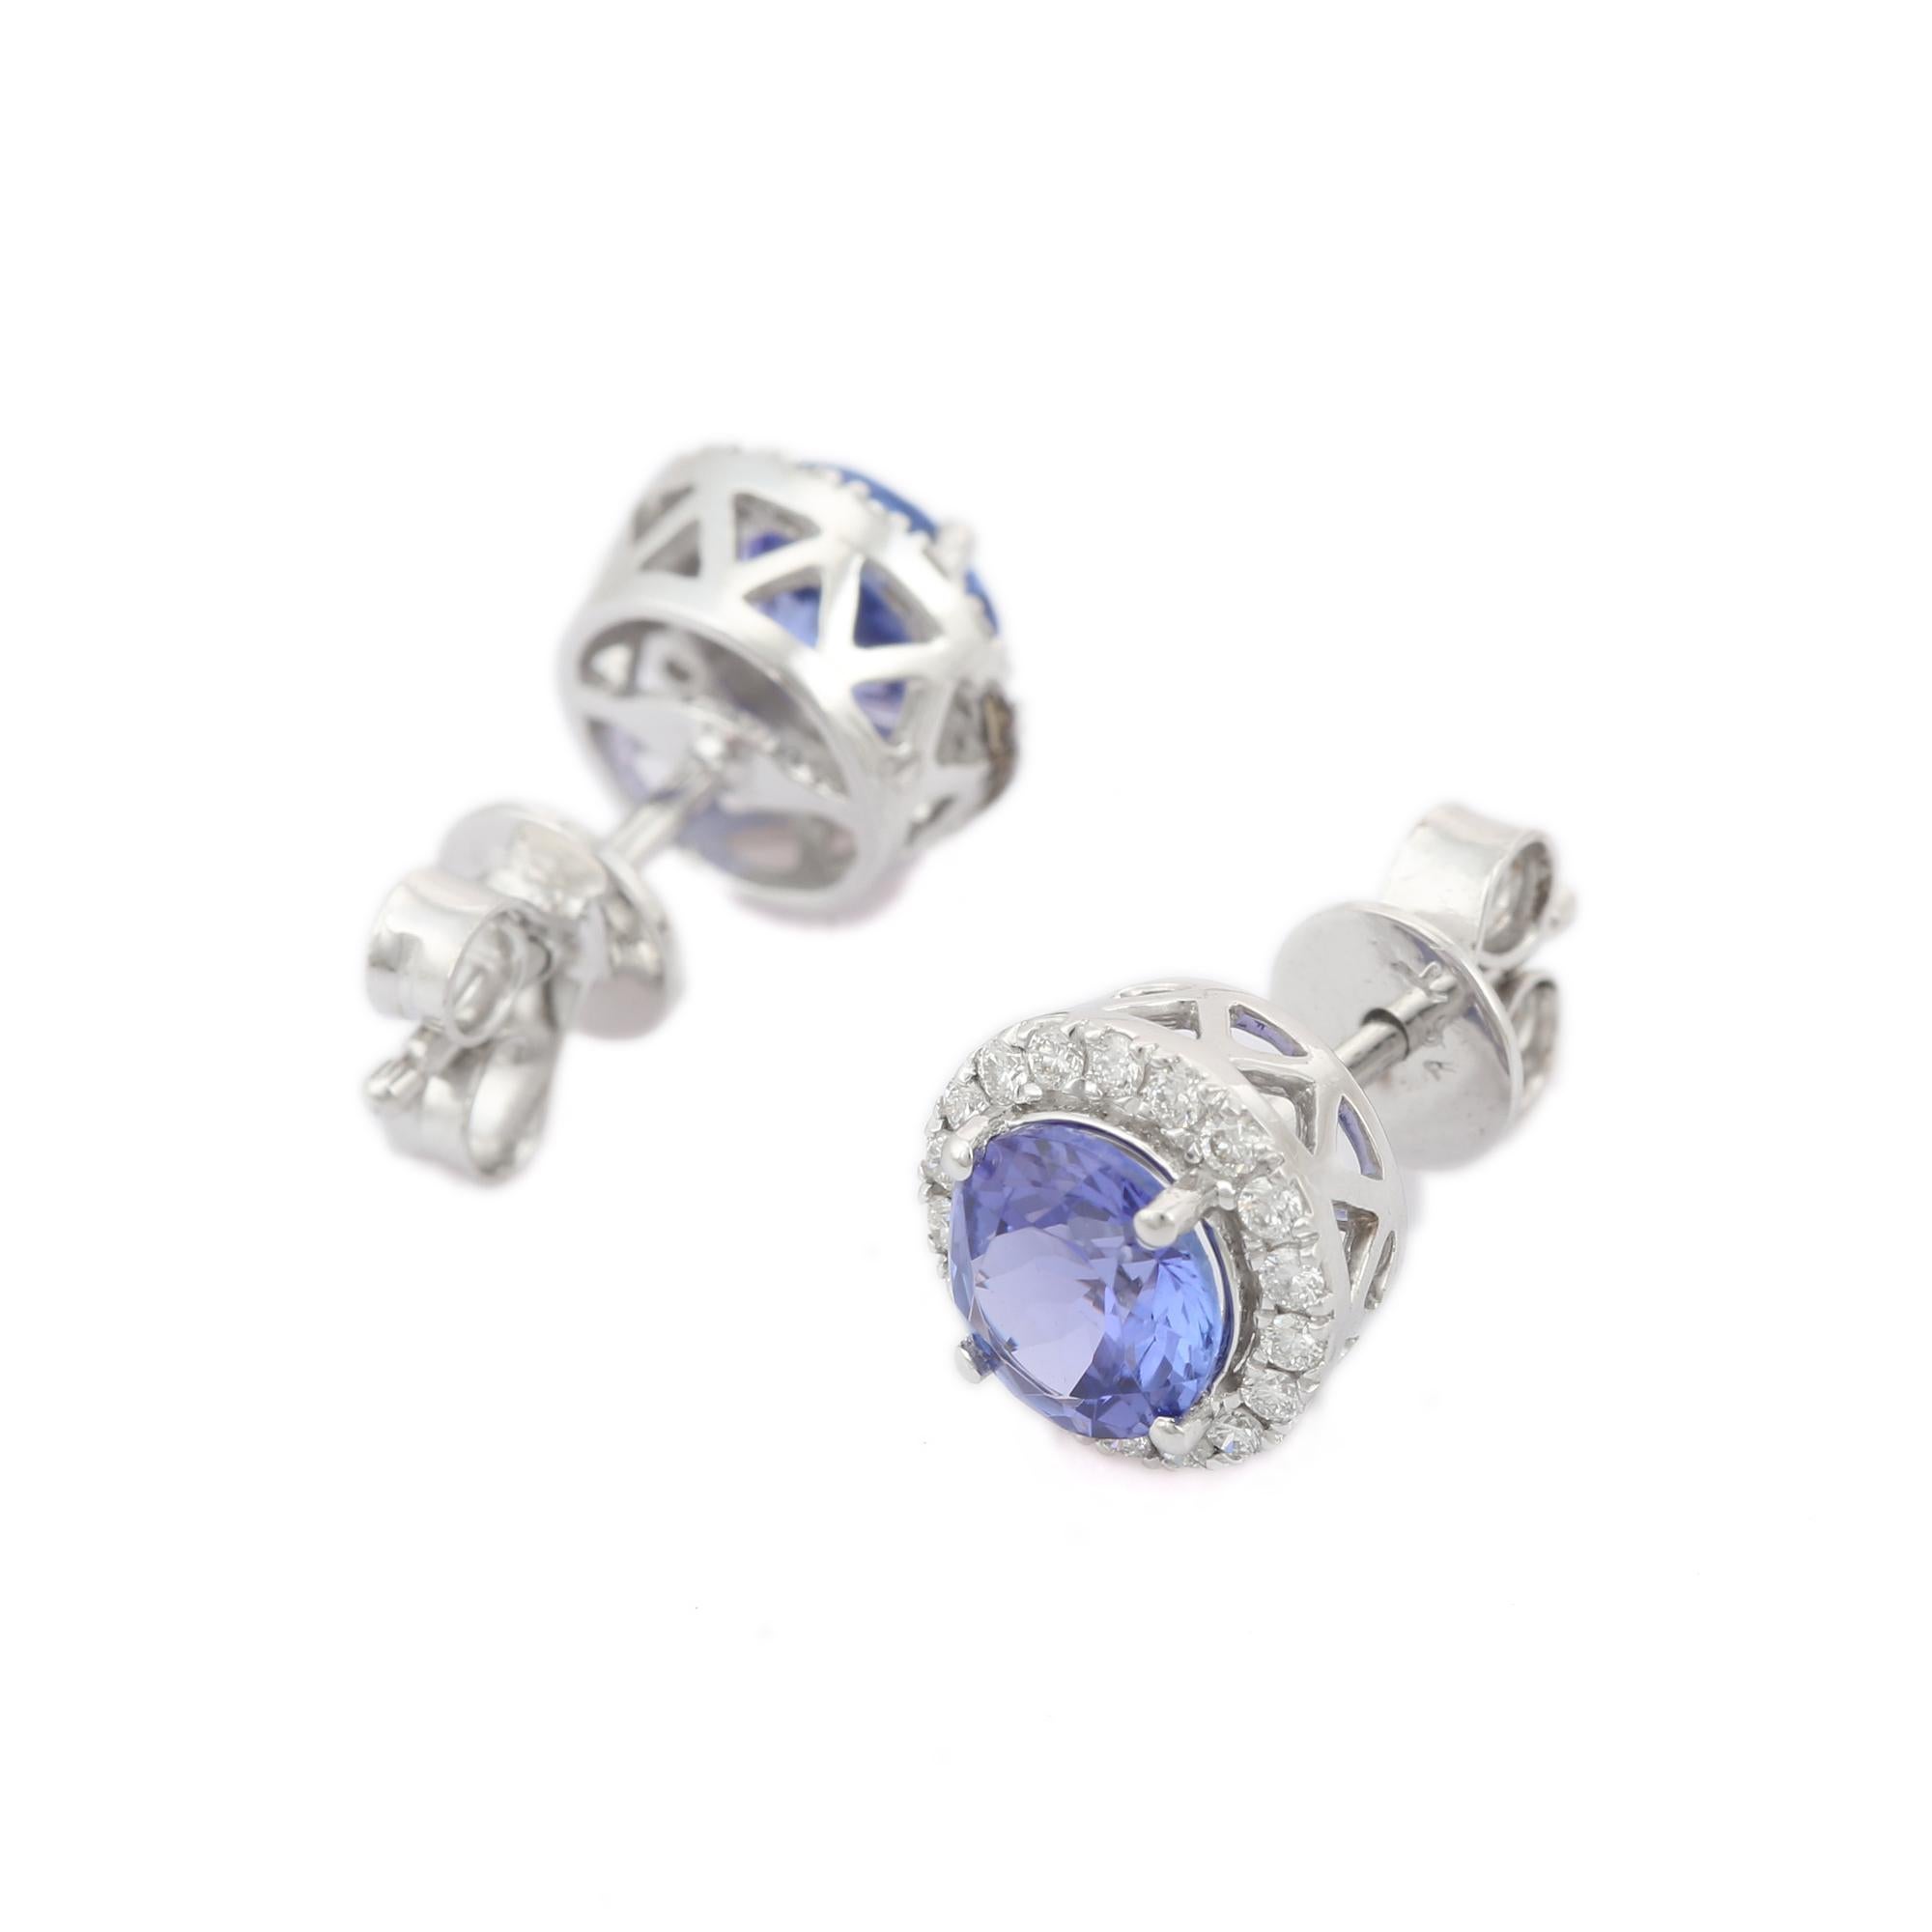 Round Cut 1.65 Carat Round Shaped Tanzanite with Diamonds Stud Earrings in 18K White Gold For Sale